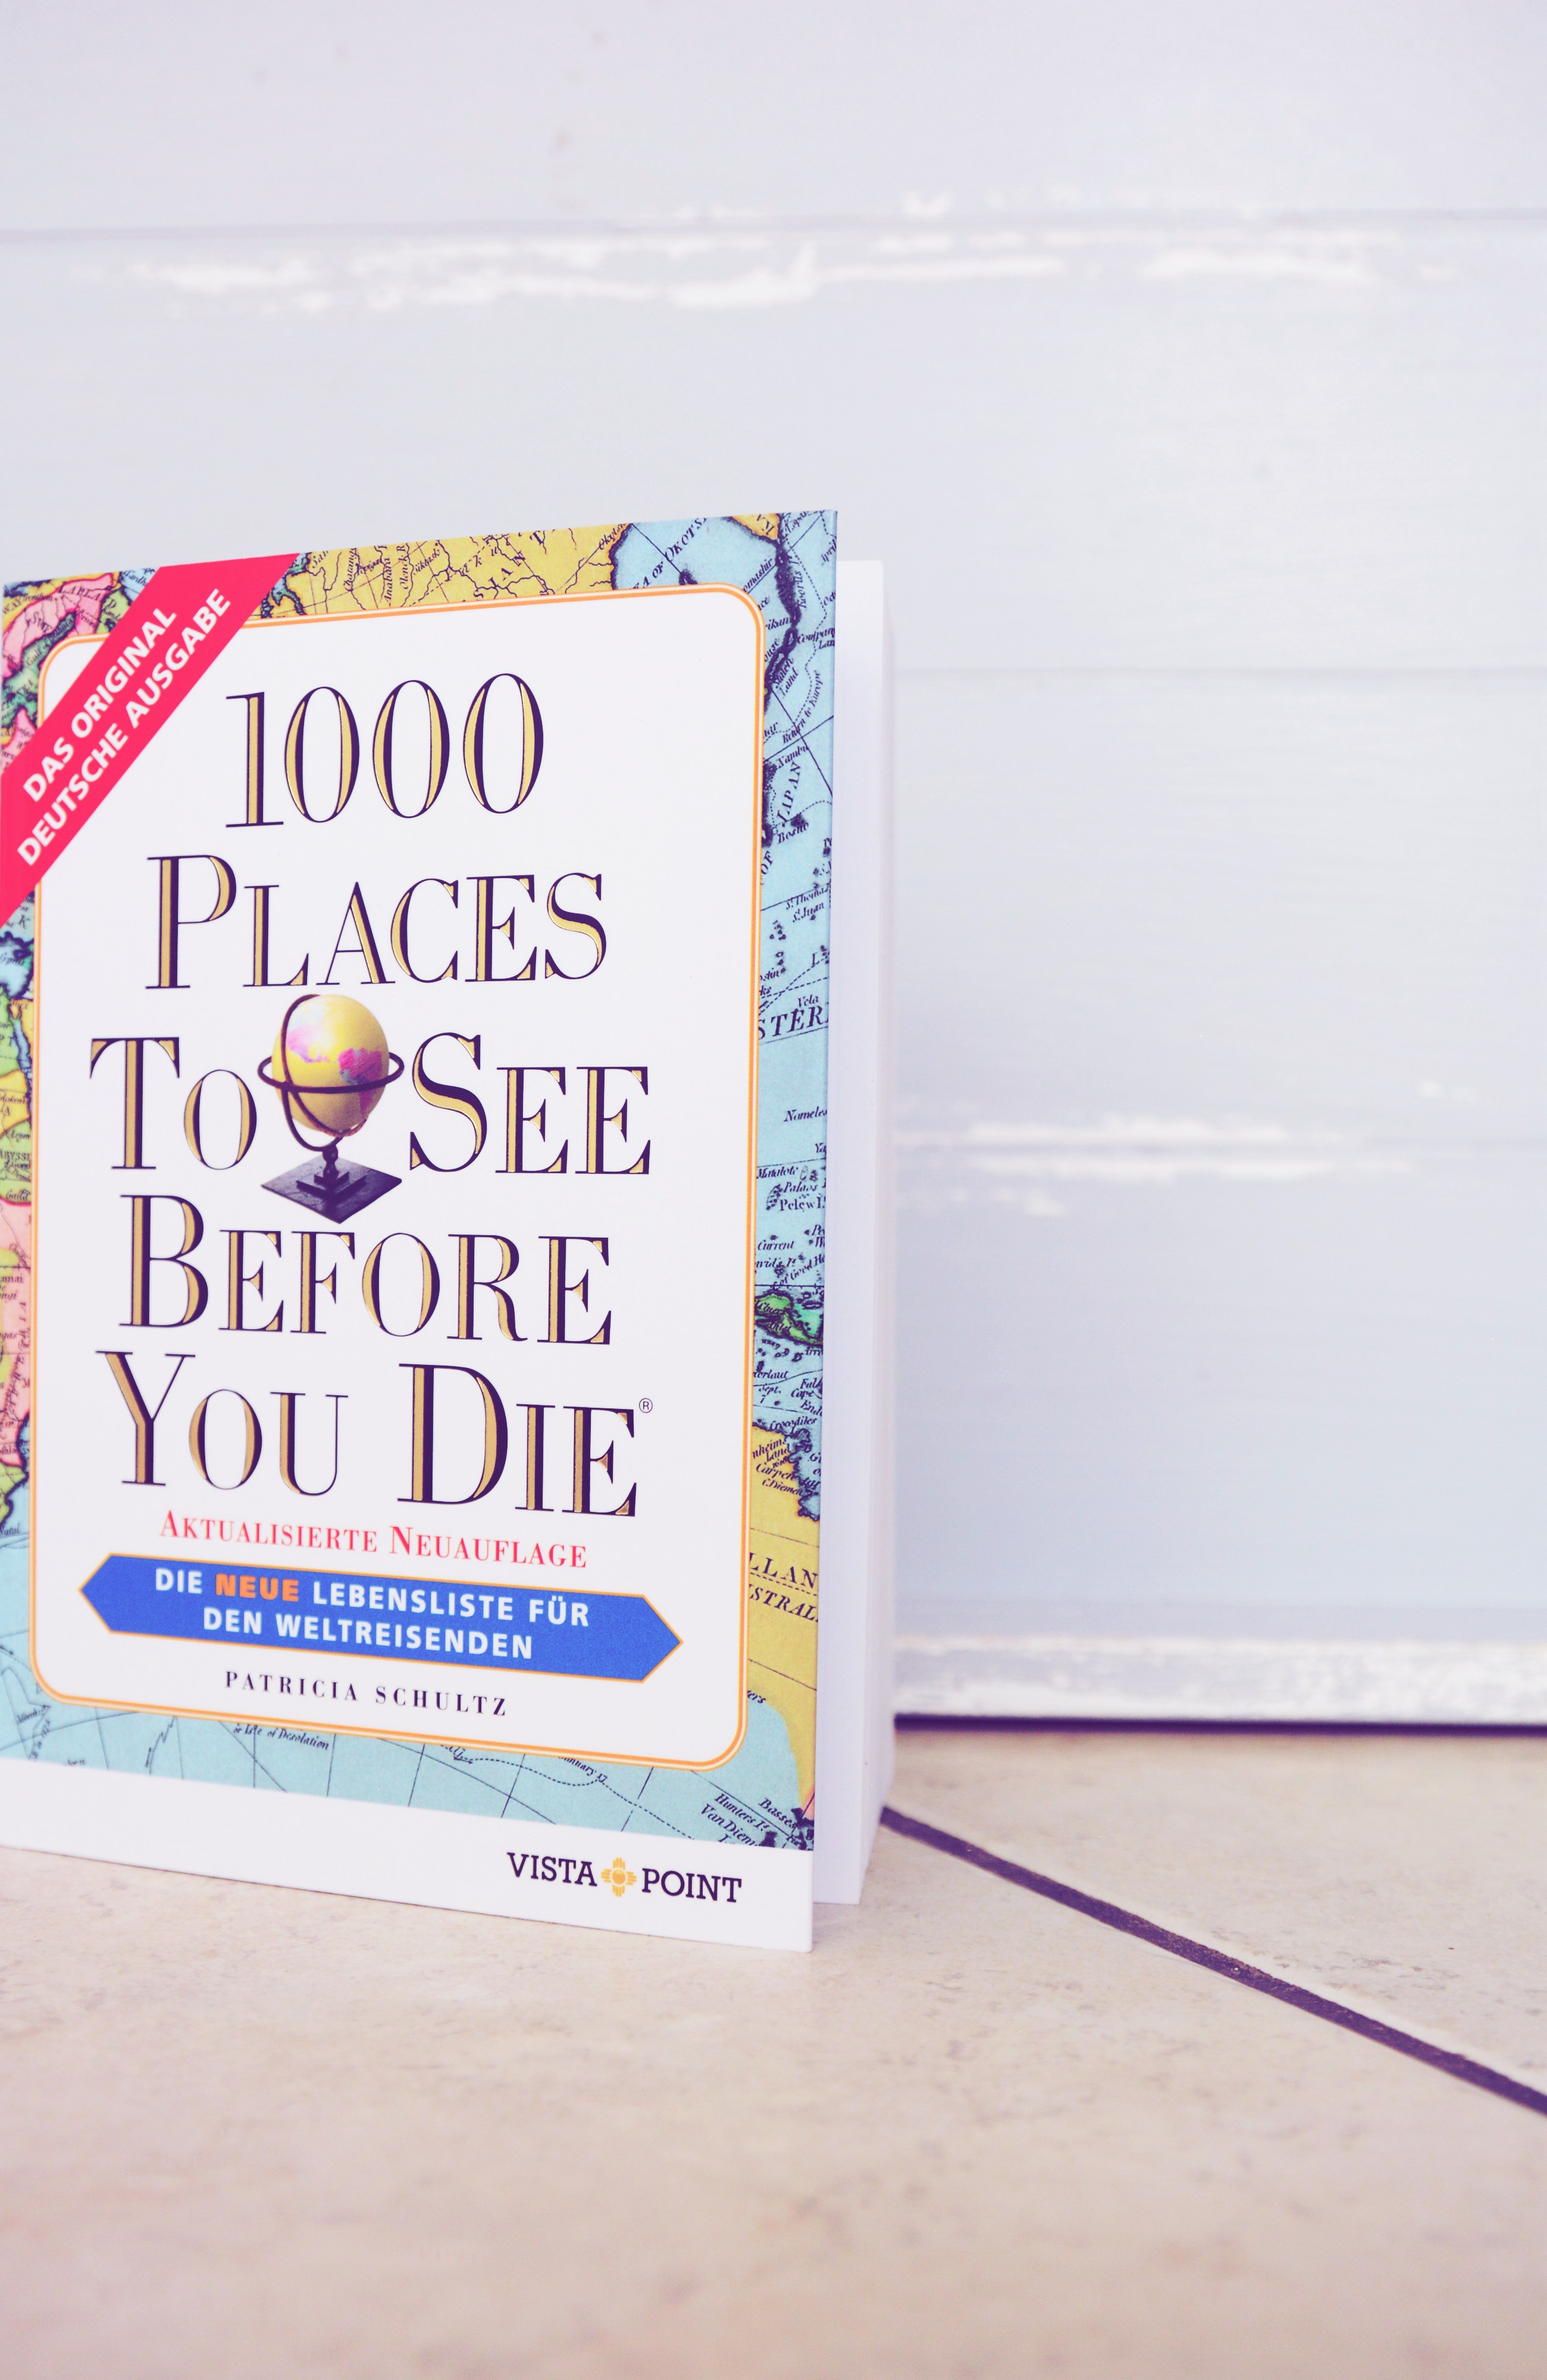 Mein Reisebuch-Tipp: 1000 Places To See Before You Die